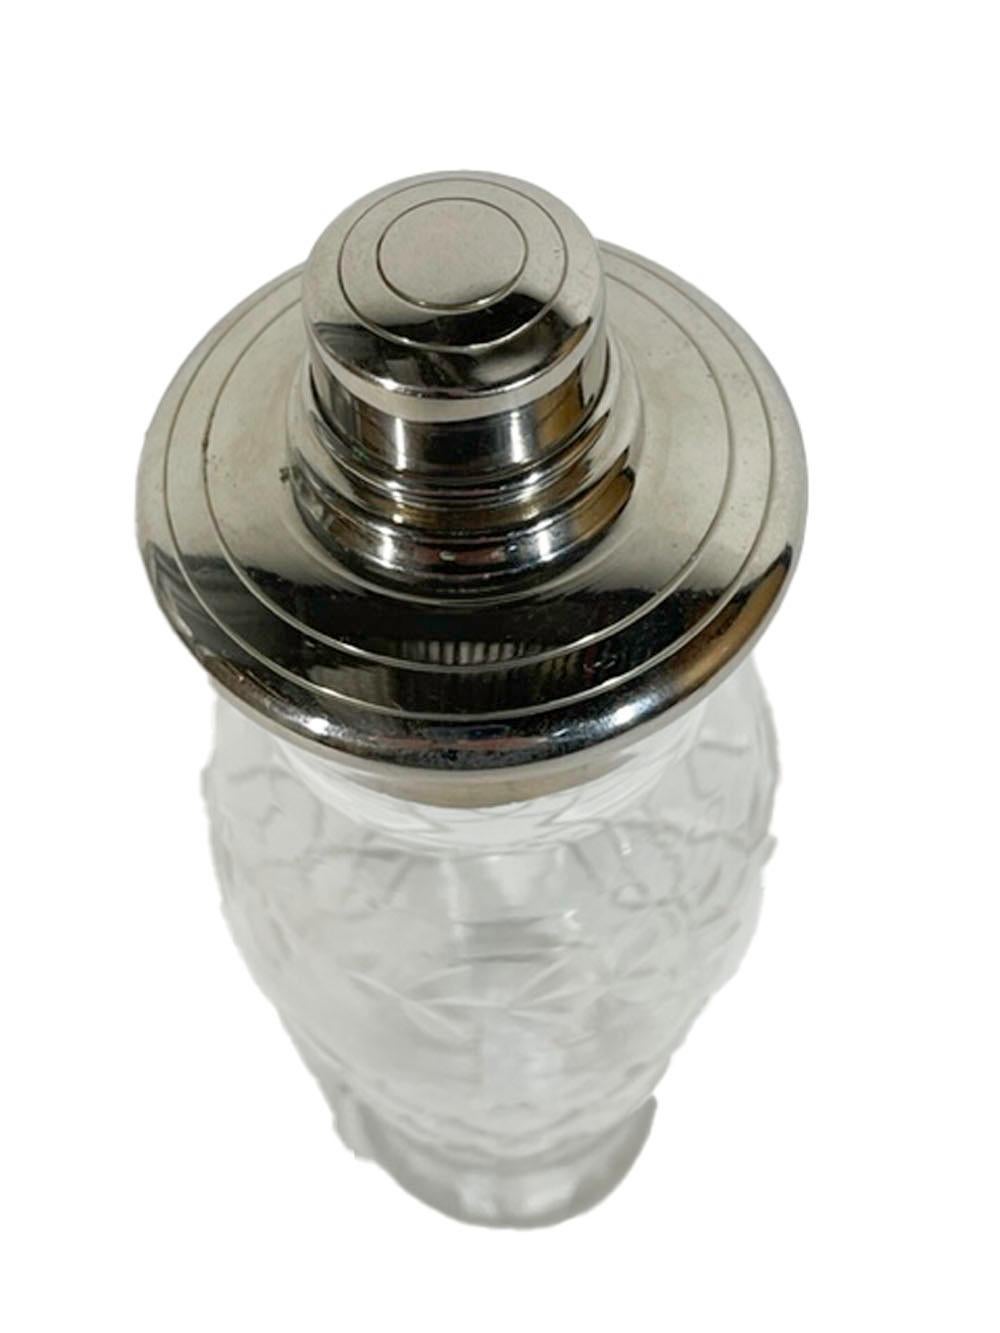 Art Deco cut glass cocktail shaker with silver plate domed center pour lid with integral strainer and cork seal.